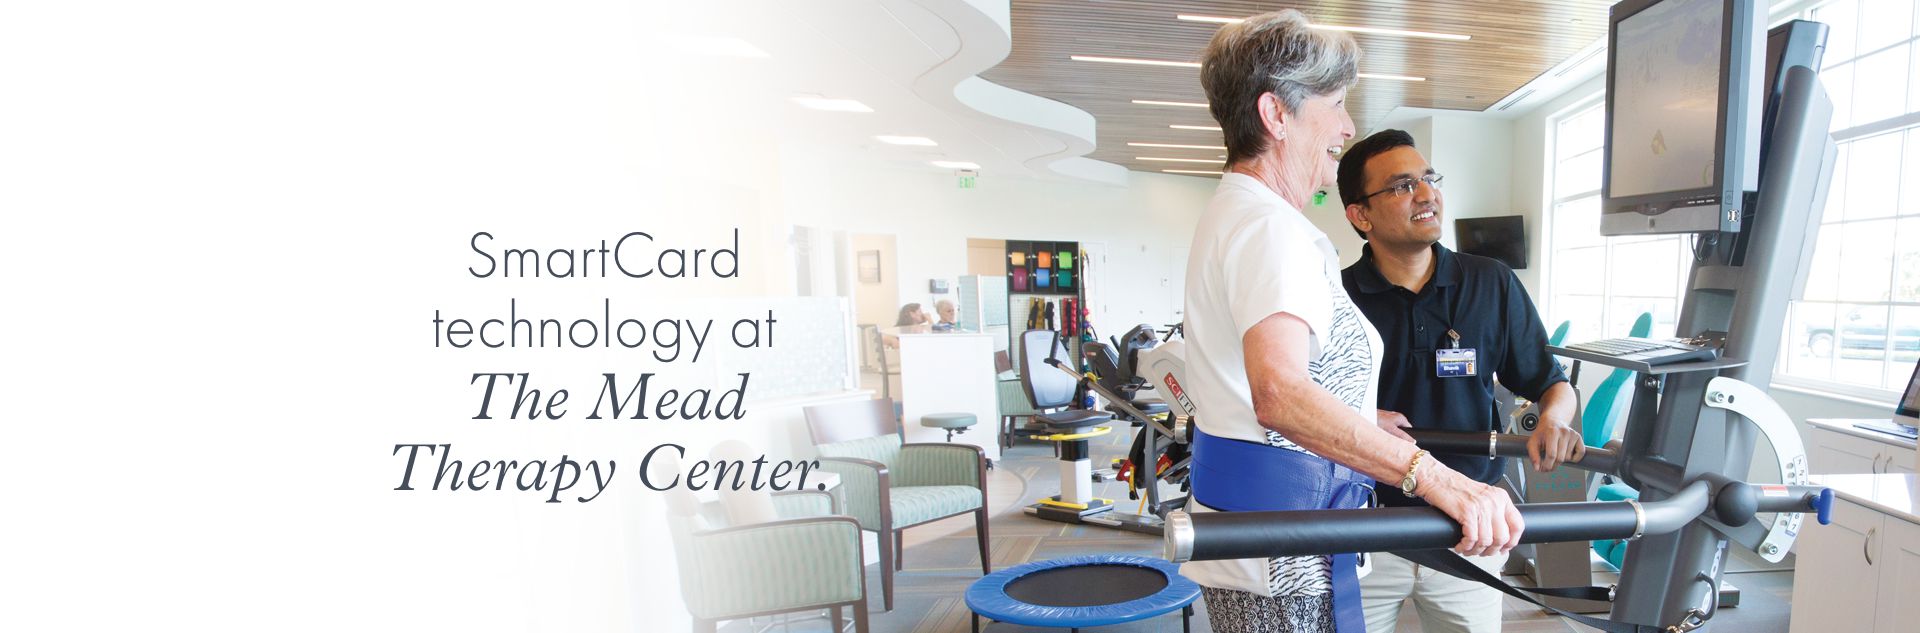 SmartCard Technology at The Mead Therapy Center.